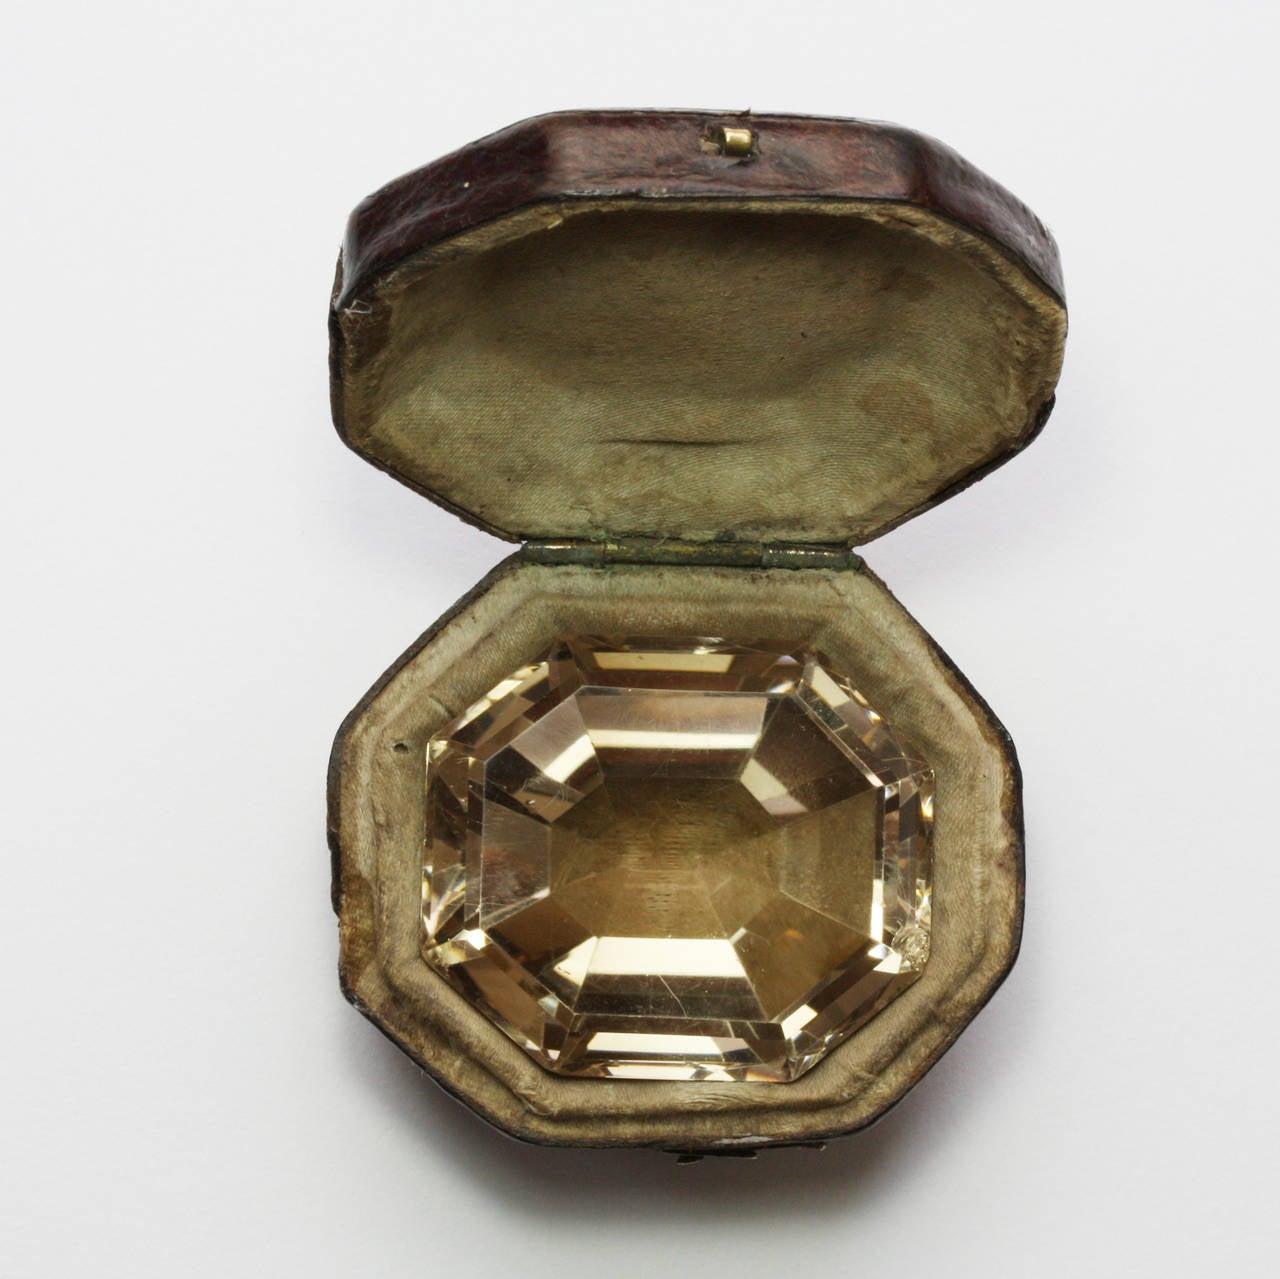 A large octagonally cut citrine (with small chip) in its original leather box, 18th century.

weight: 35.6 grams
dimensions stone: 3.8 x 3.4 x 2 cm.